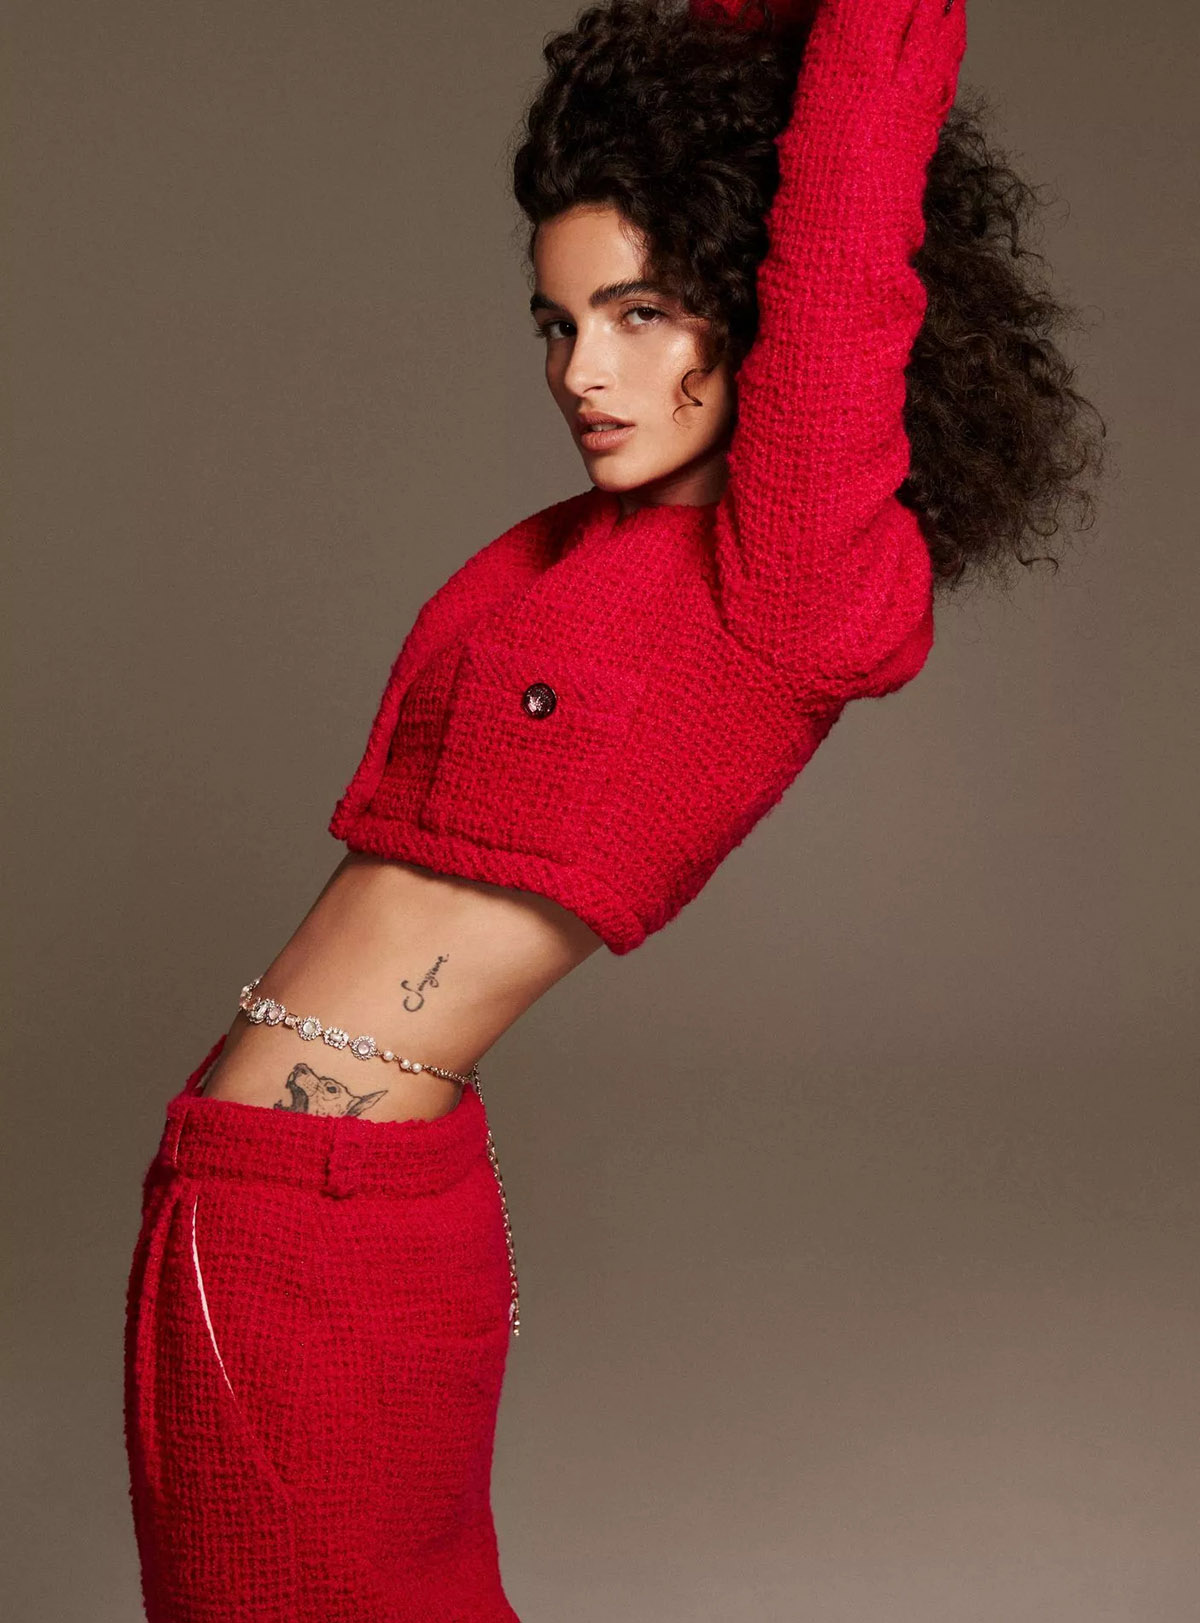 Chiara Scelsi covers Madame Figaro August 27th, 2021 by David Roemer